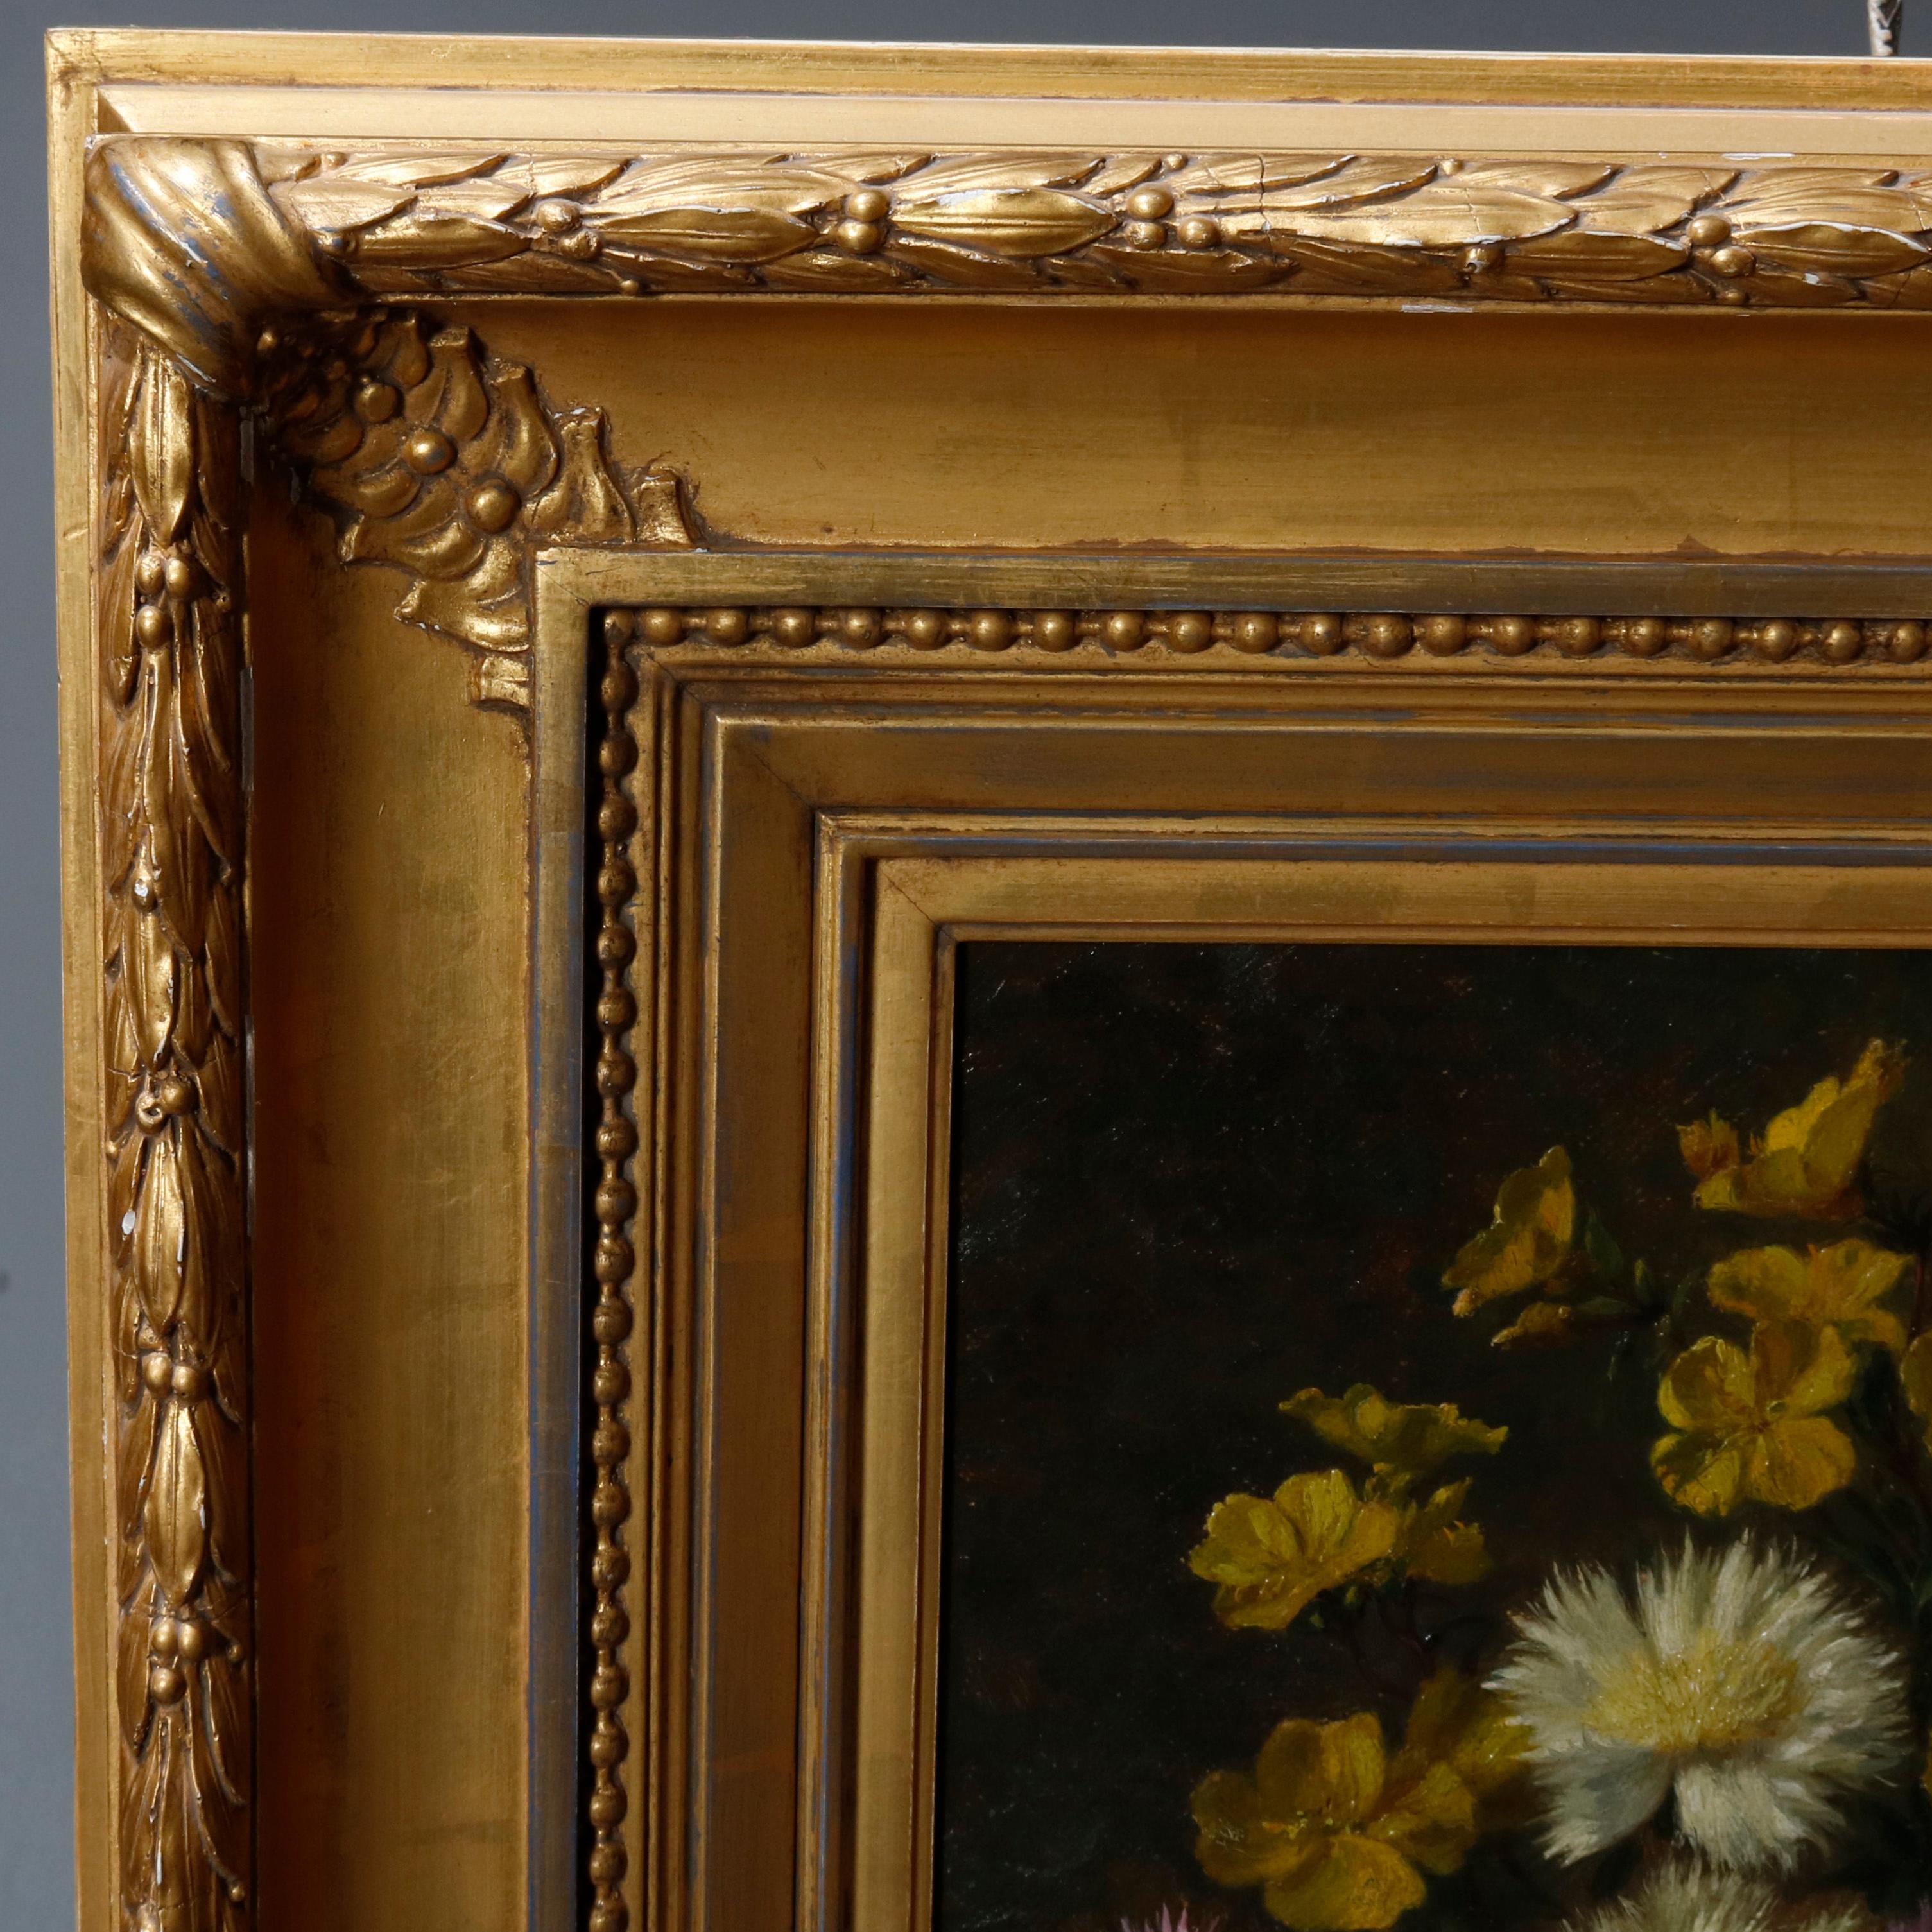 Hand-Painted Floral Still Painting of Vase Bouquet on Table in Giltwood Frame, circa 1900